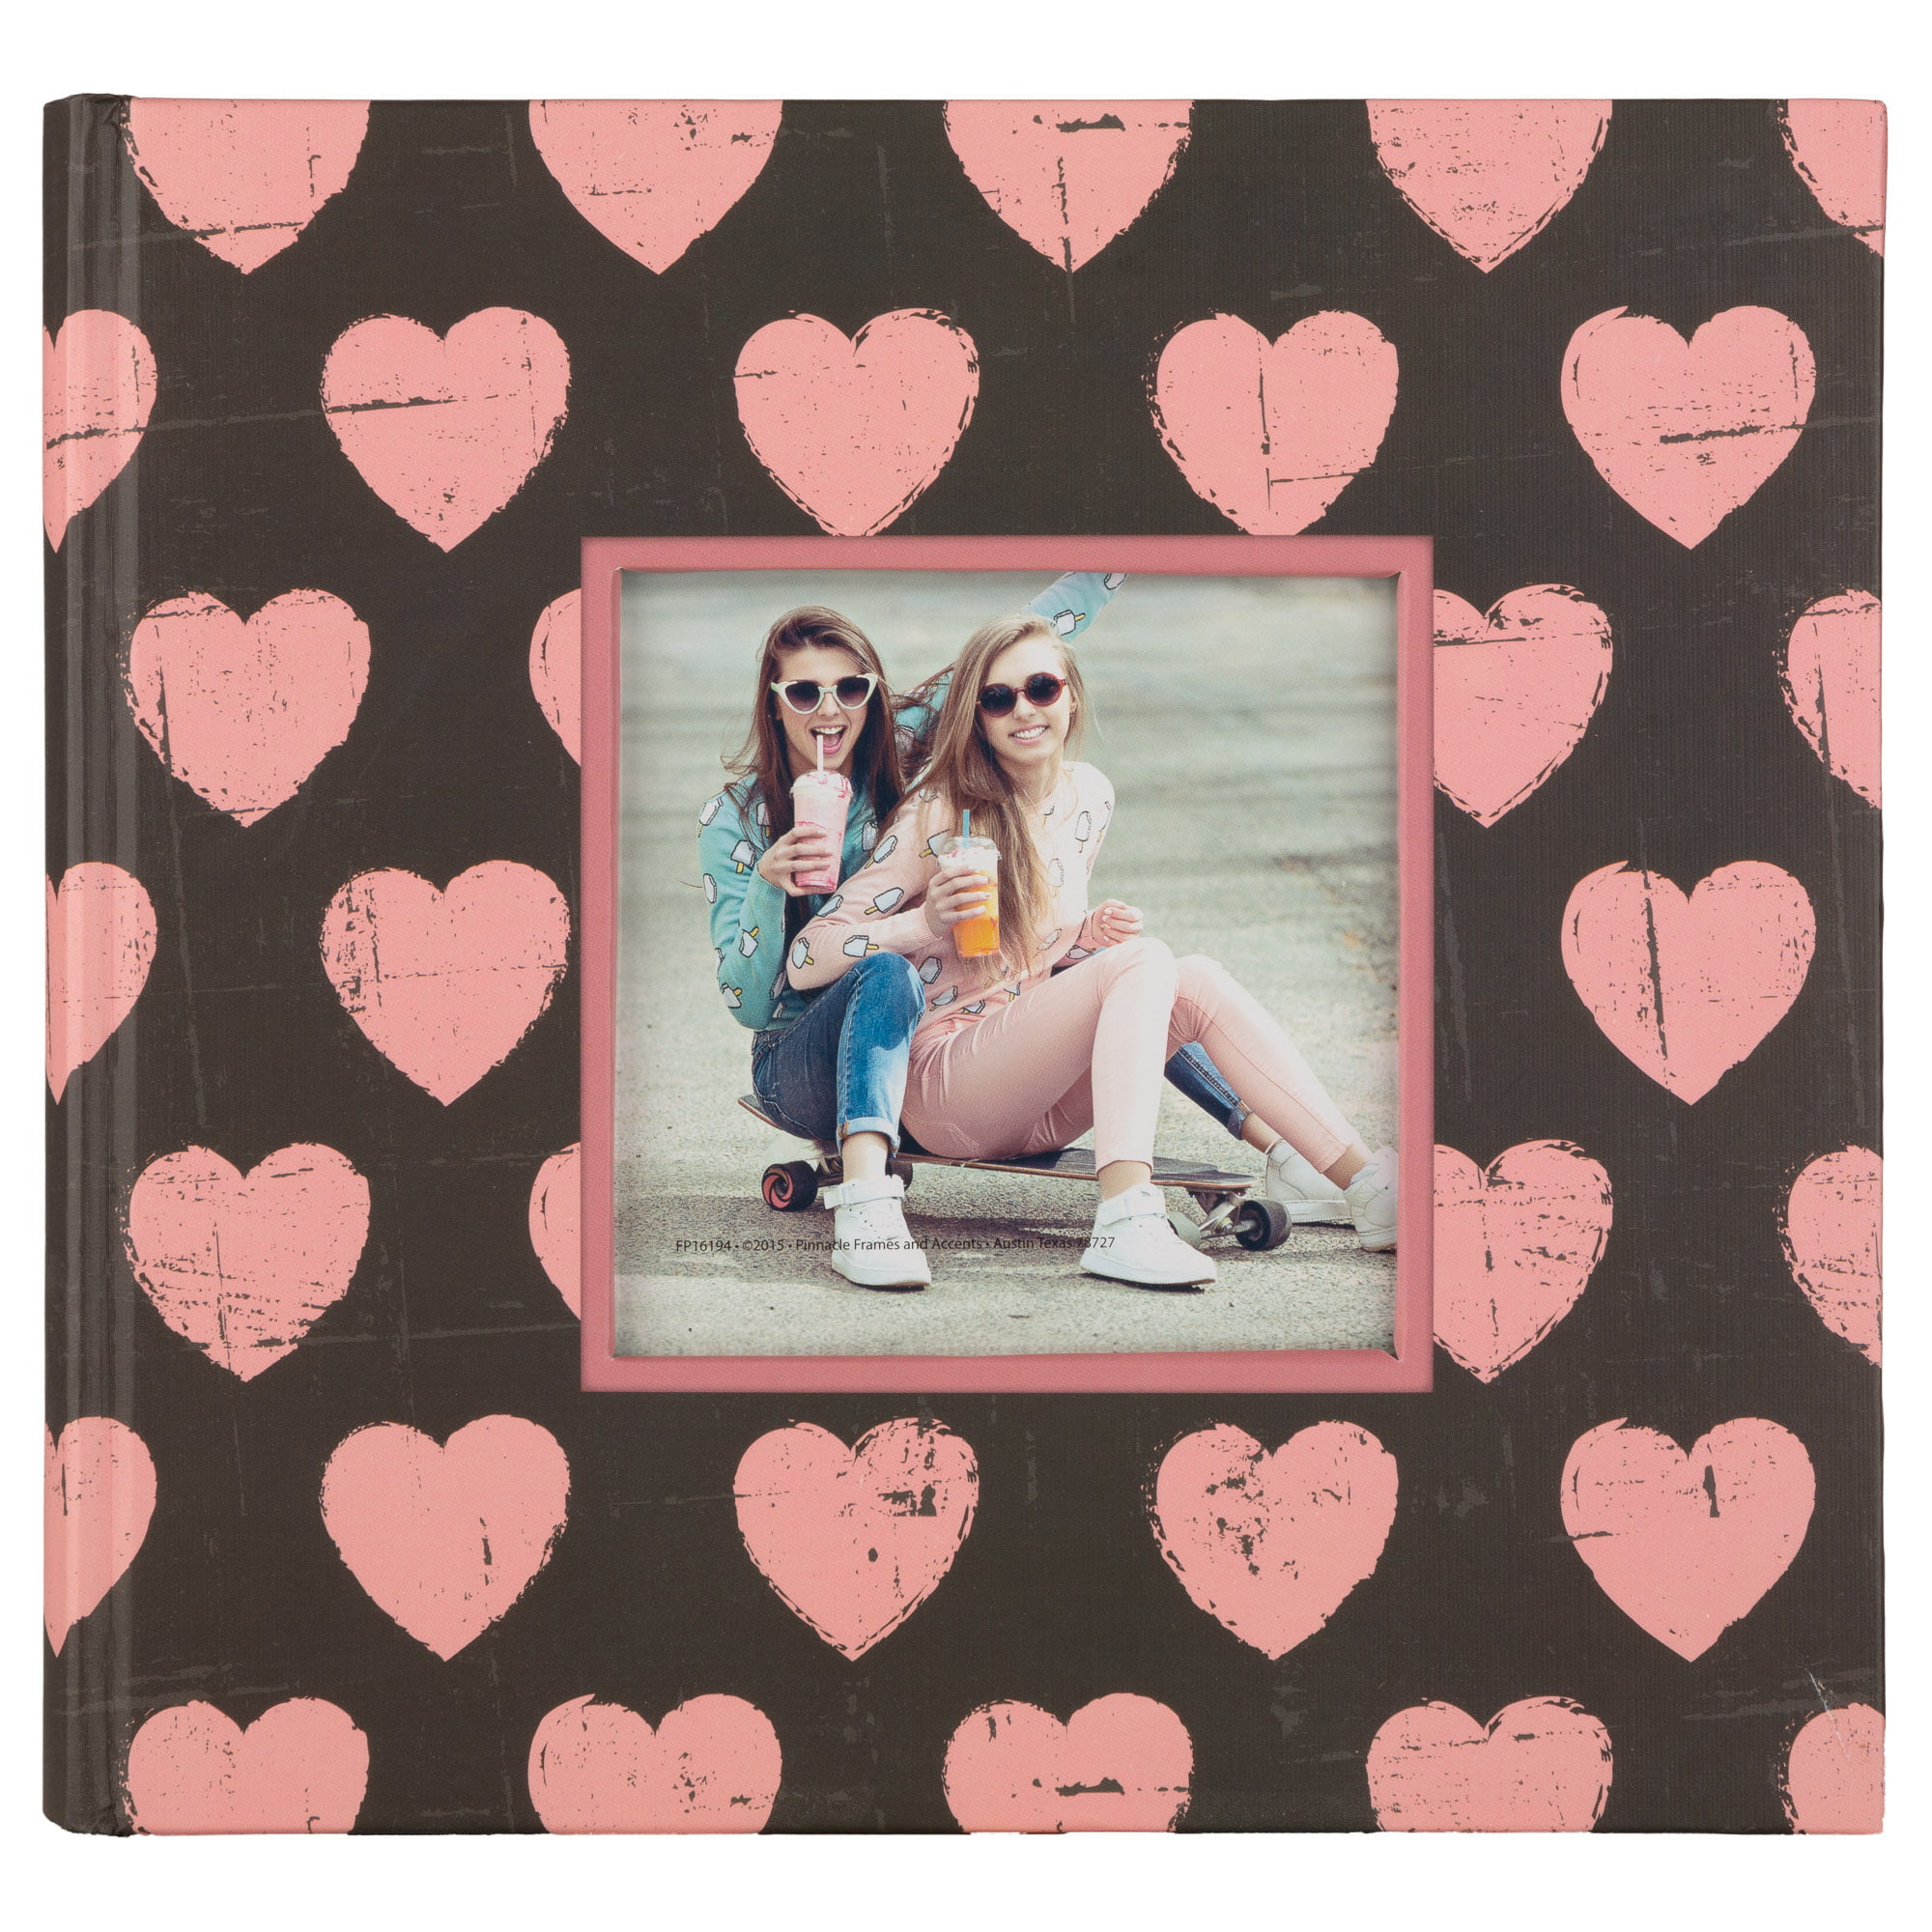 Pinnacle Pink Hearts Framed Front Photo Album Holds X Photos